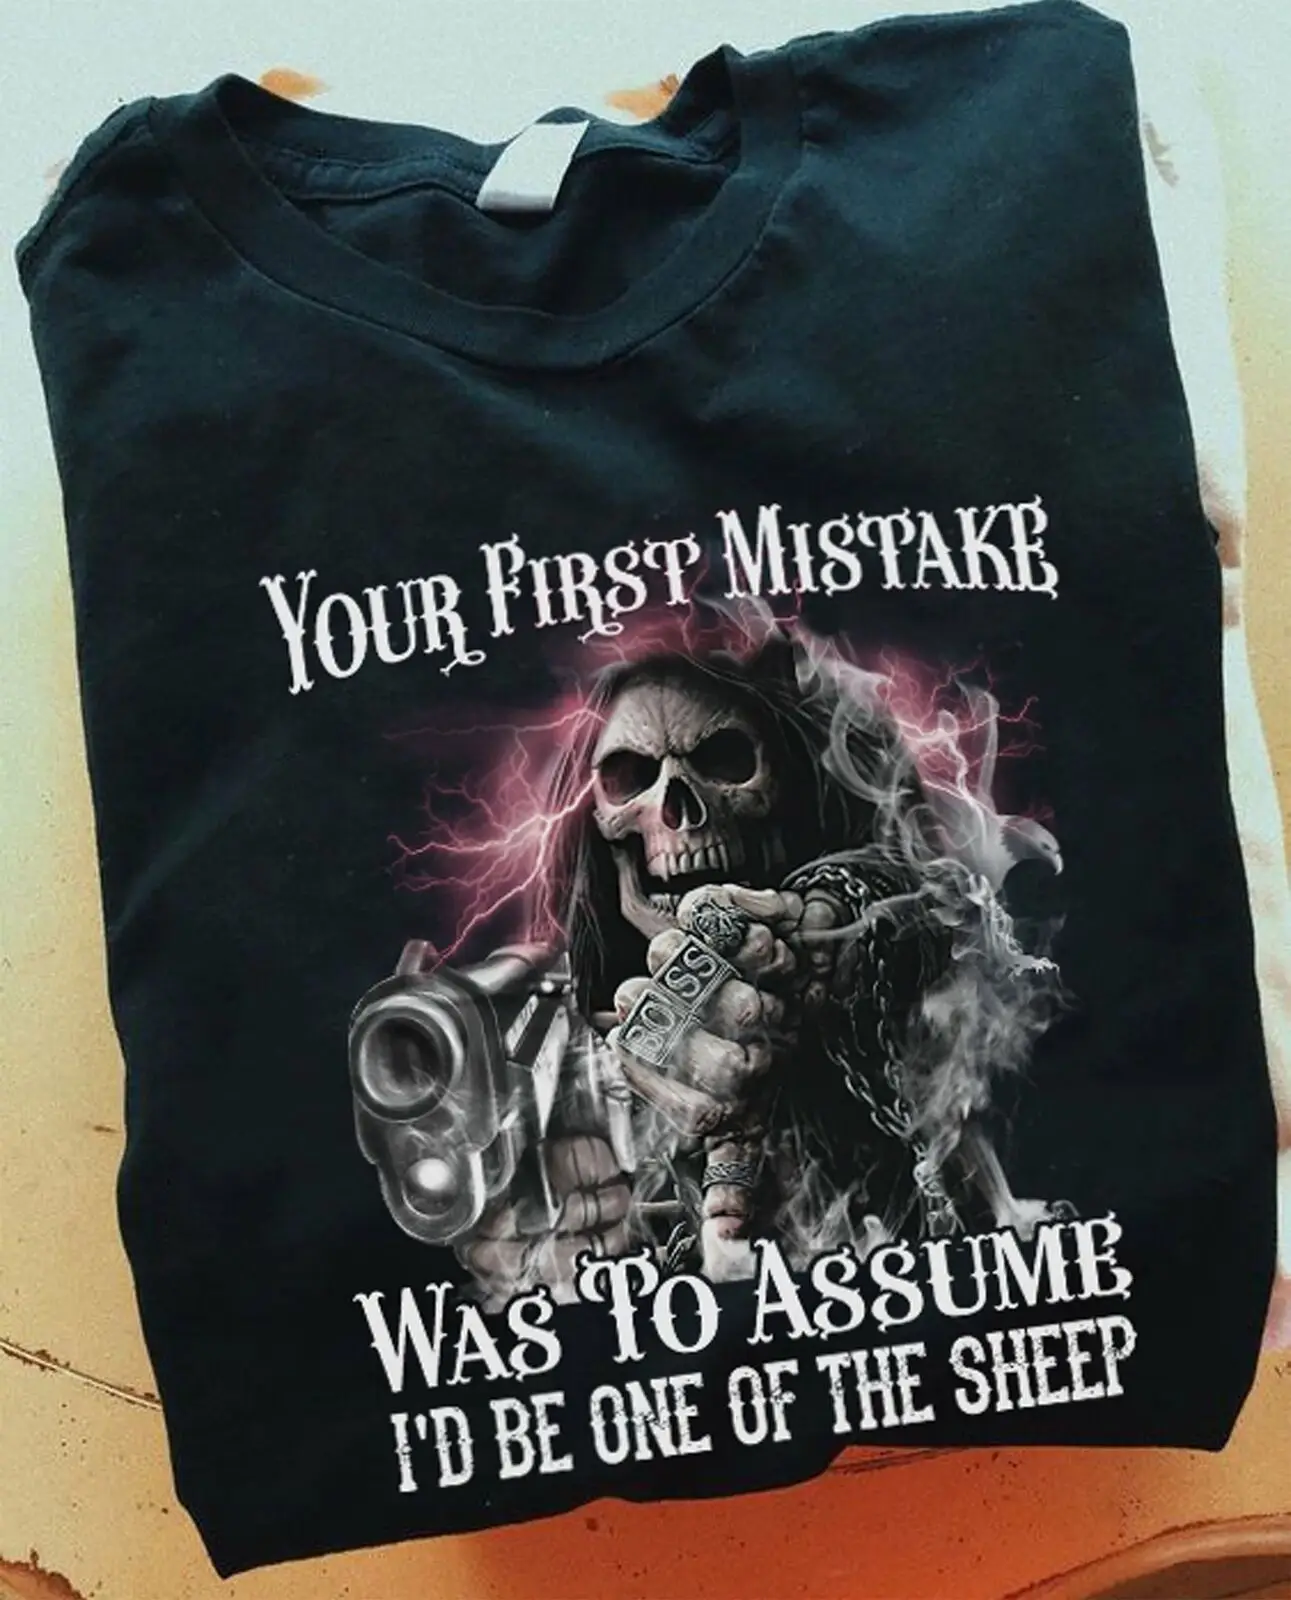 

Your First Mistake Was To Assume I'D Be One Of The Sheep T-Shirt, Skull T-Shirt shirt for men